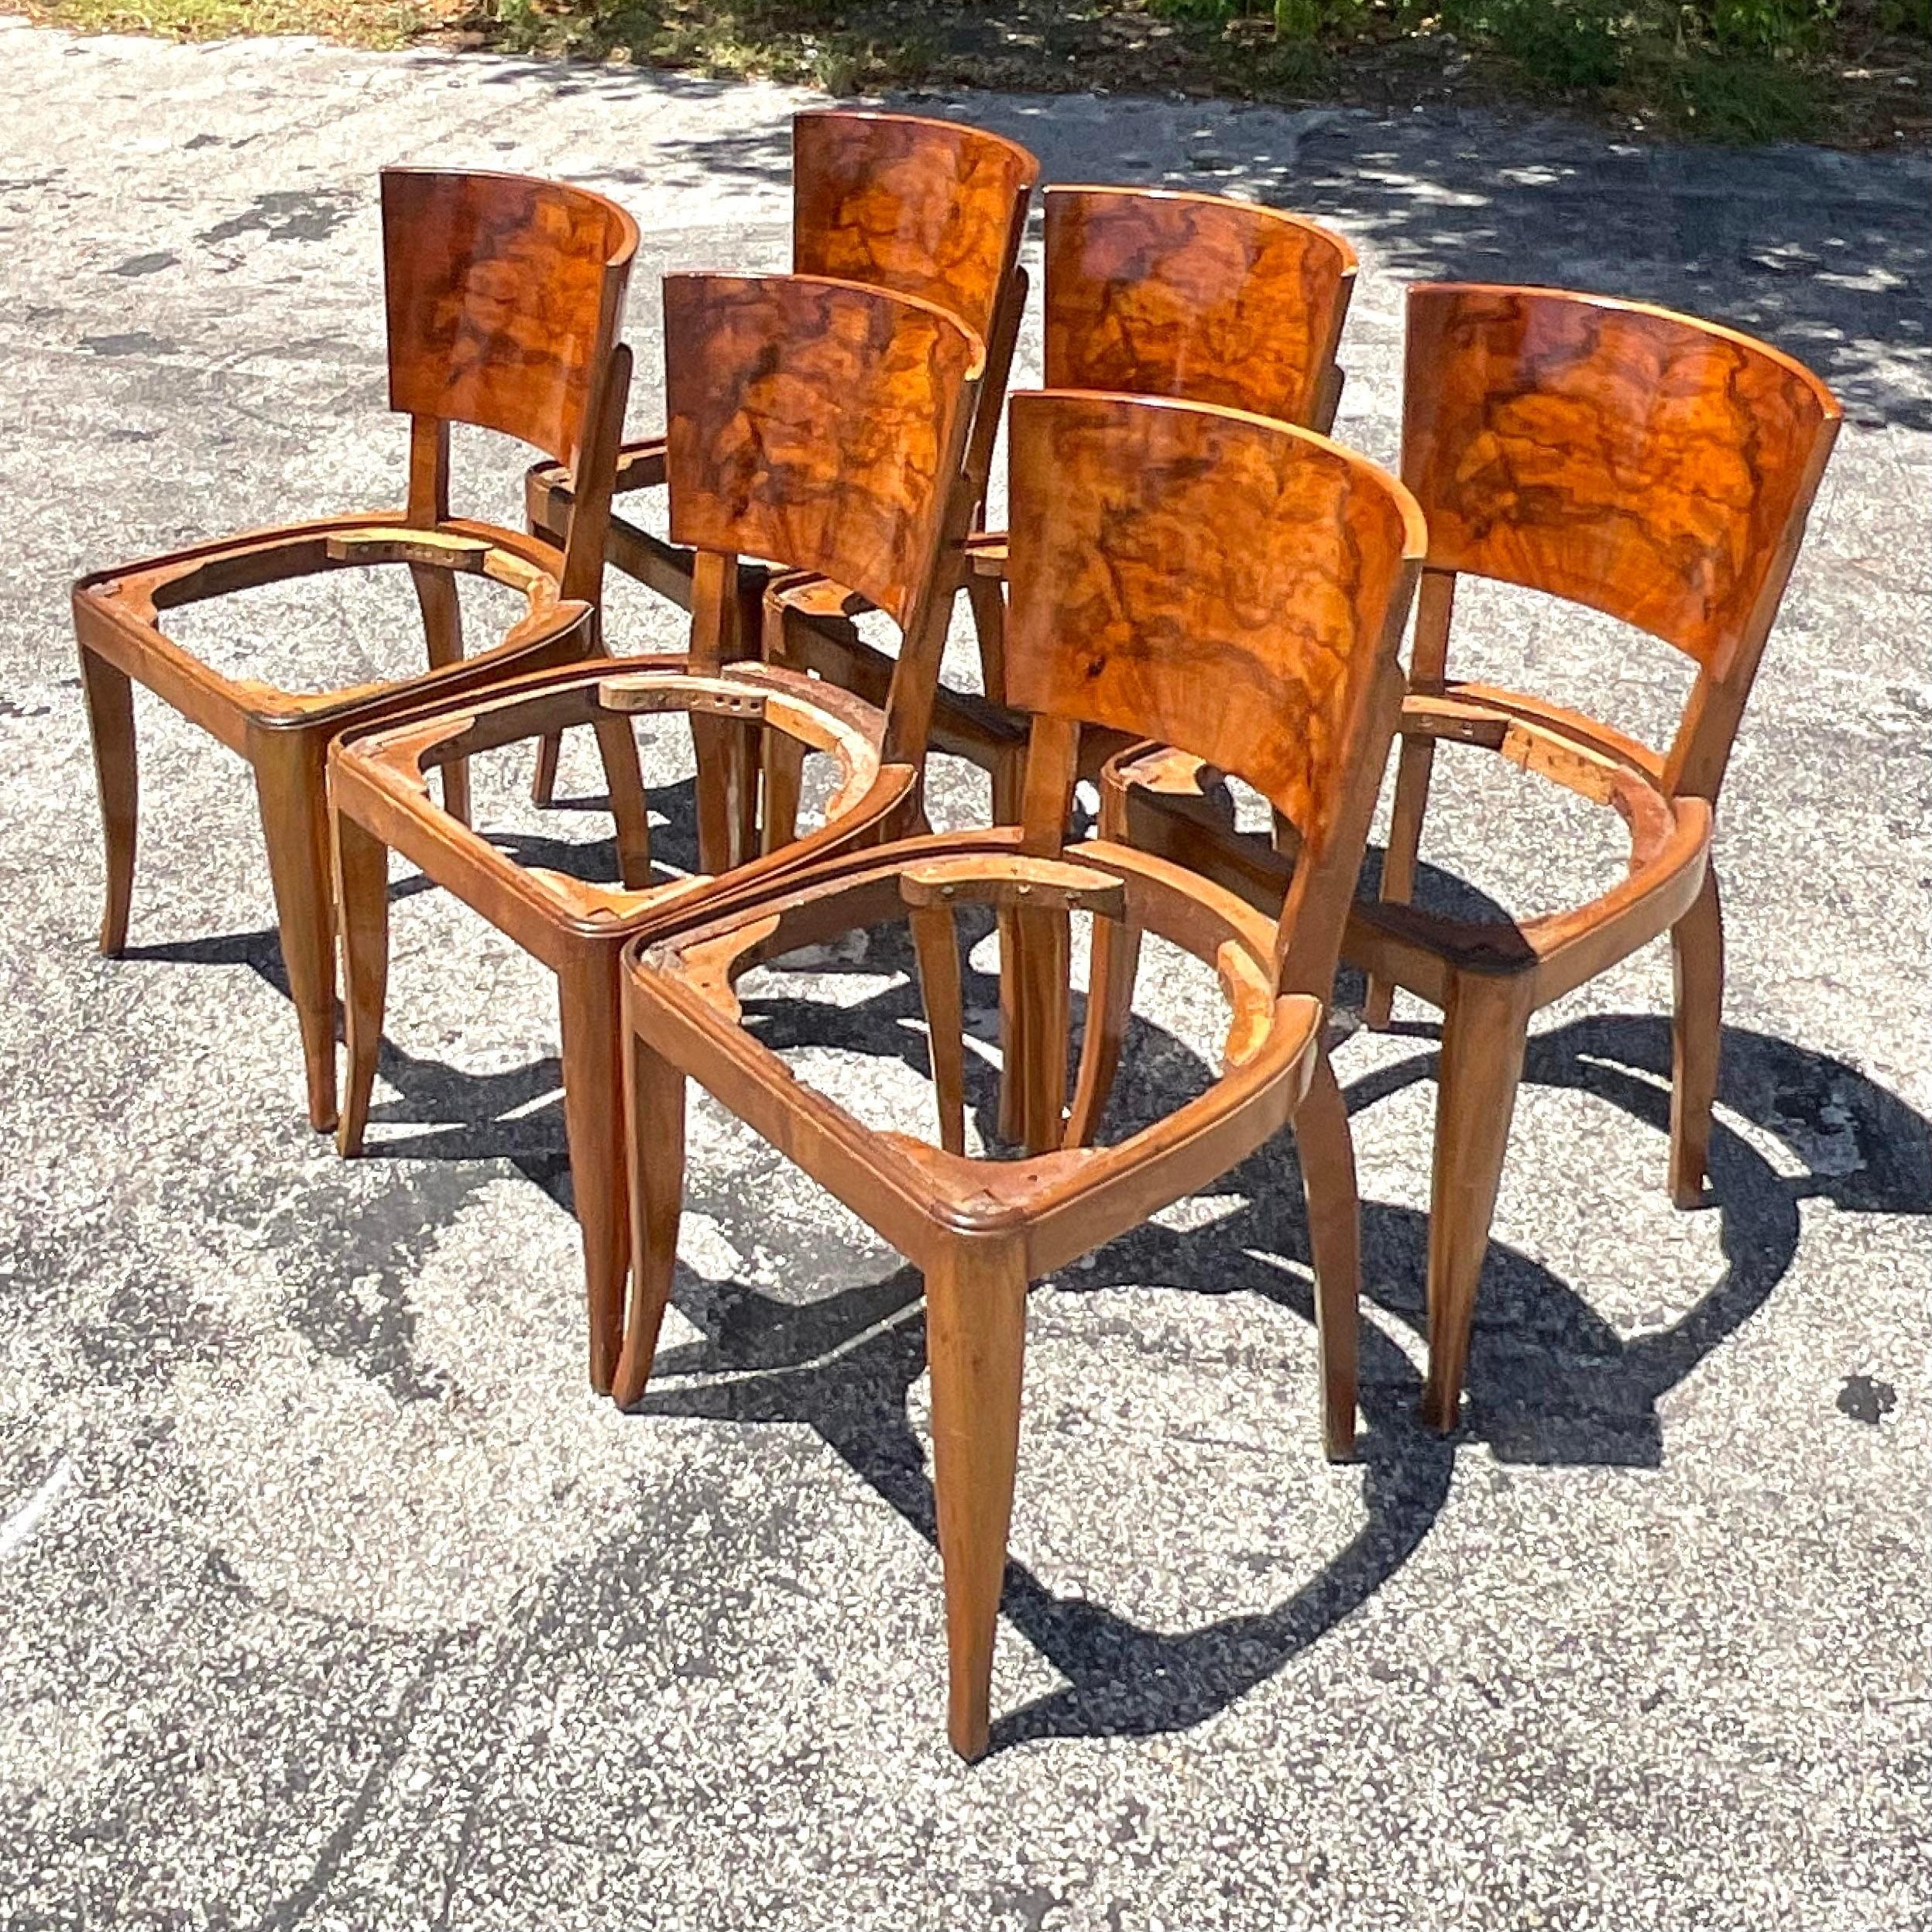 Vintage Deco Burl Wood Dining Chairs - Set of 6 In Good Condition For Sale In west palm beach, FL